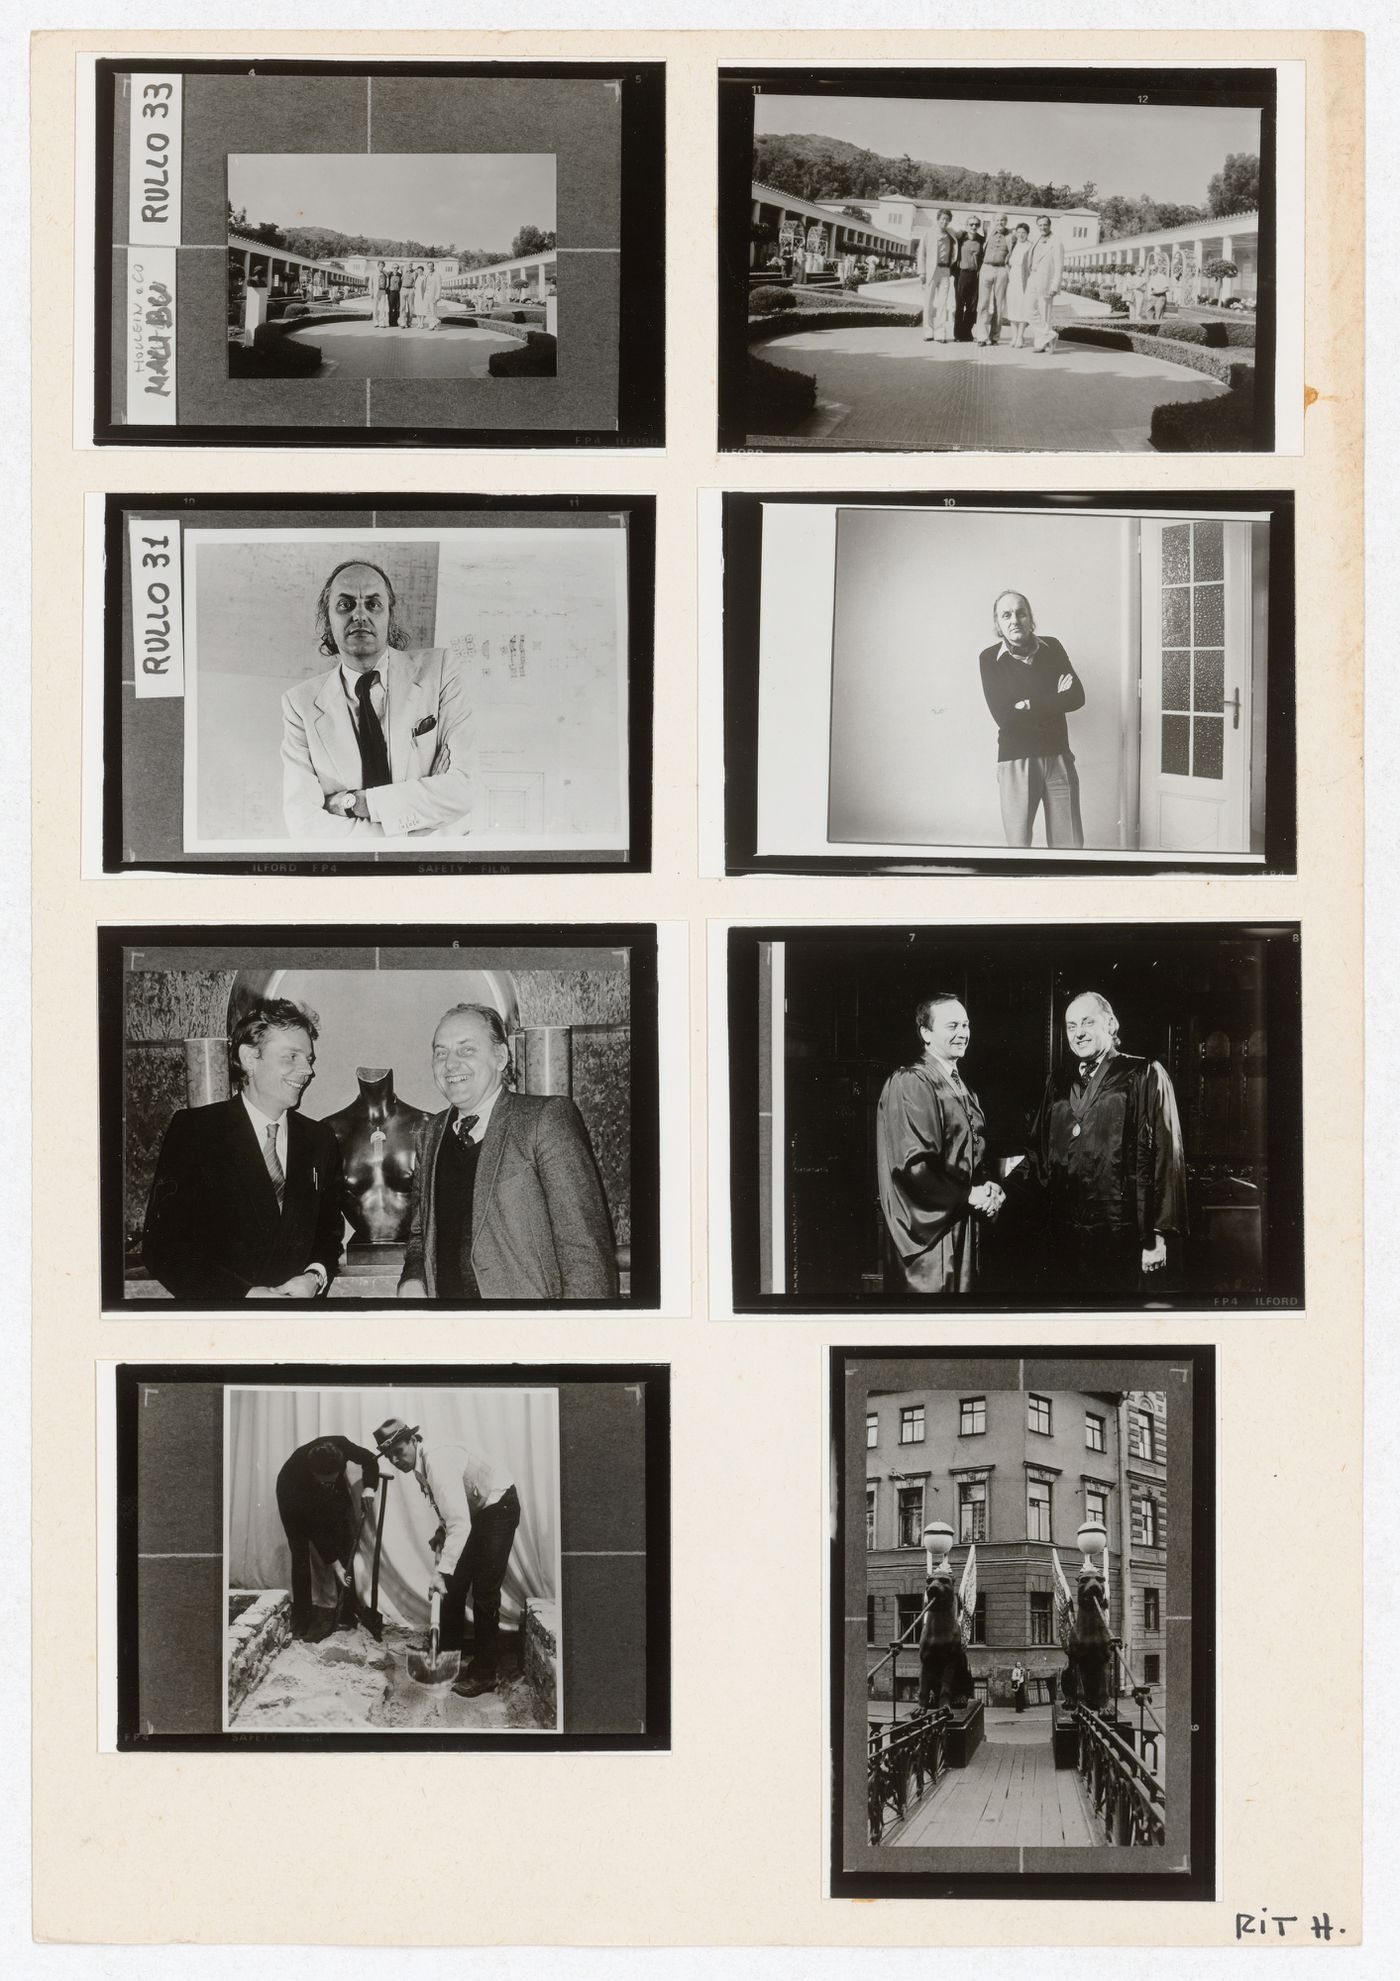 Photographs for the exhibition Hans Hollein. Opere 1960-1988